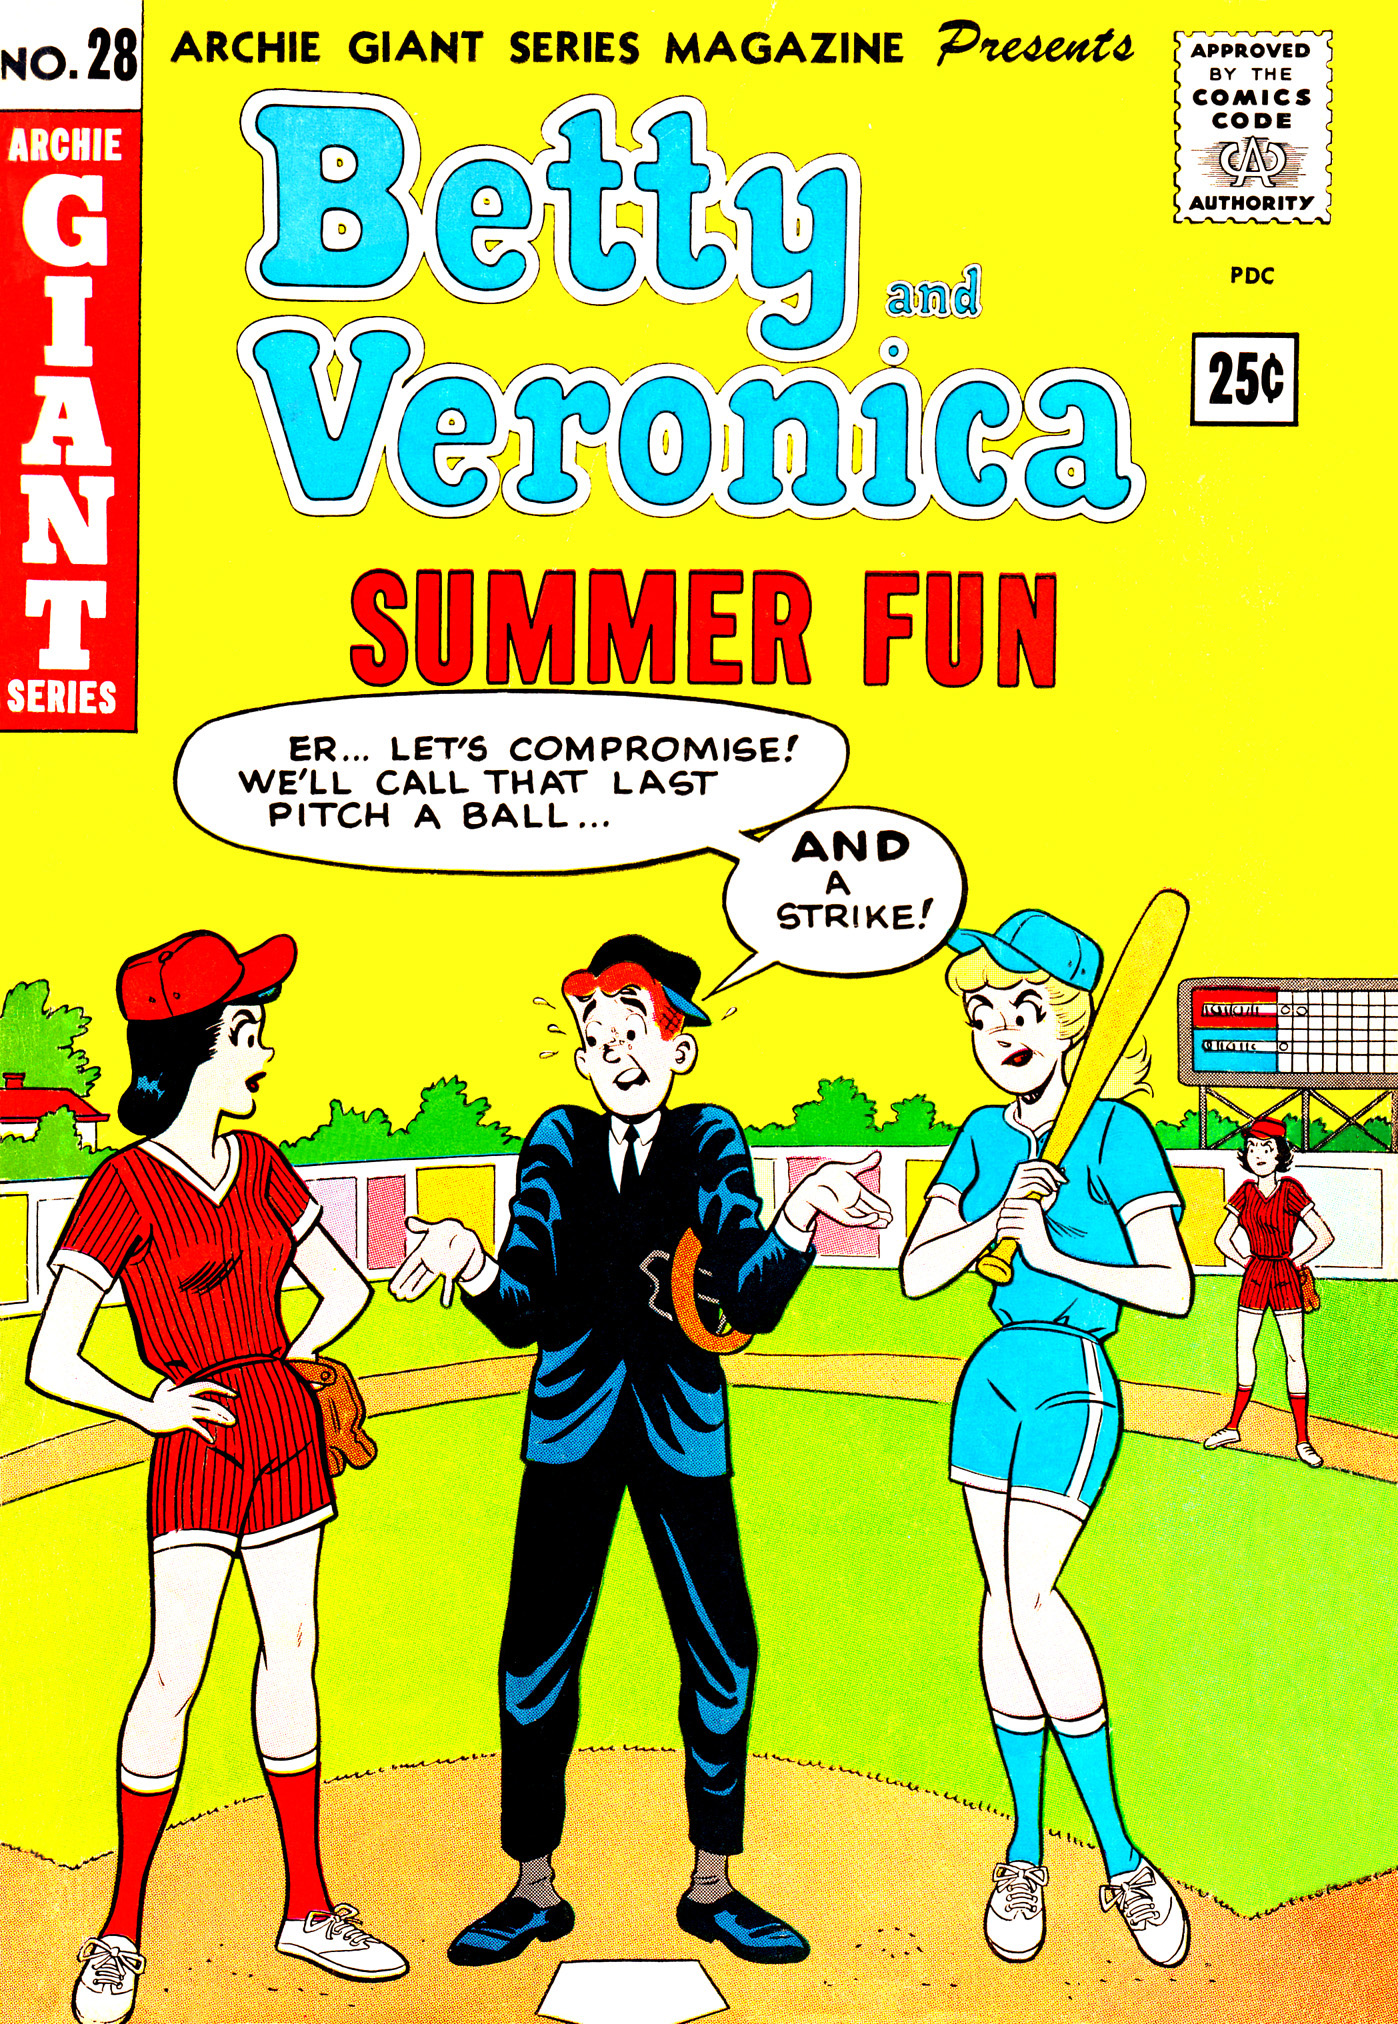 Read online Archie Giant Series Magazine comic -  Issue #28 - 1